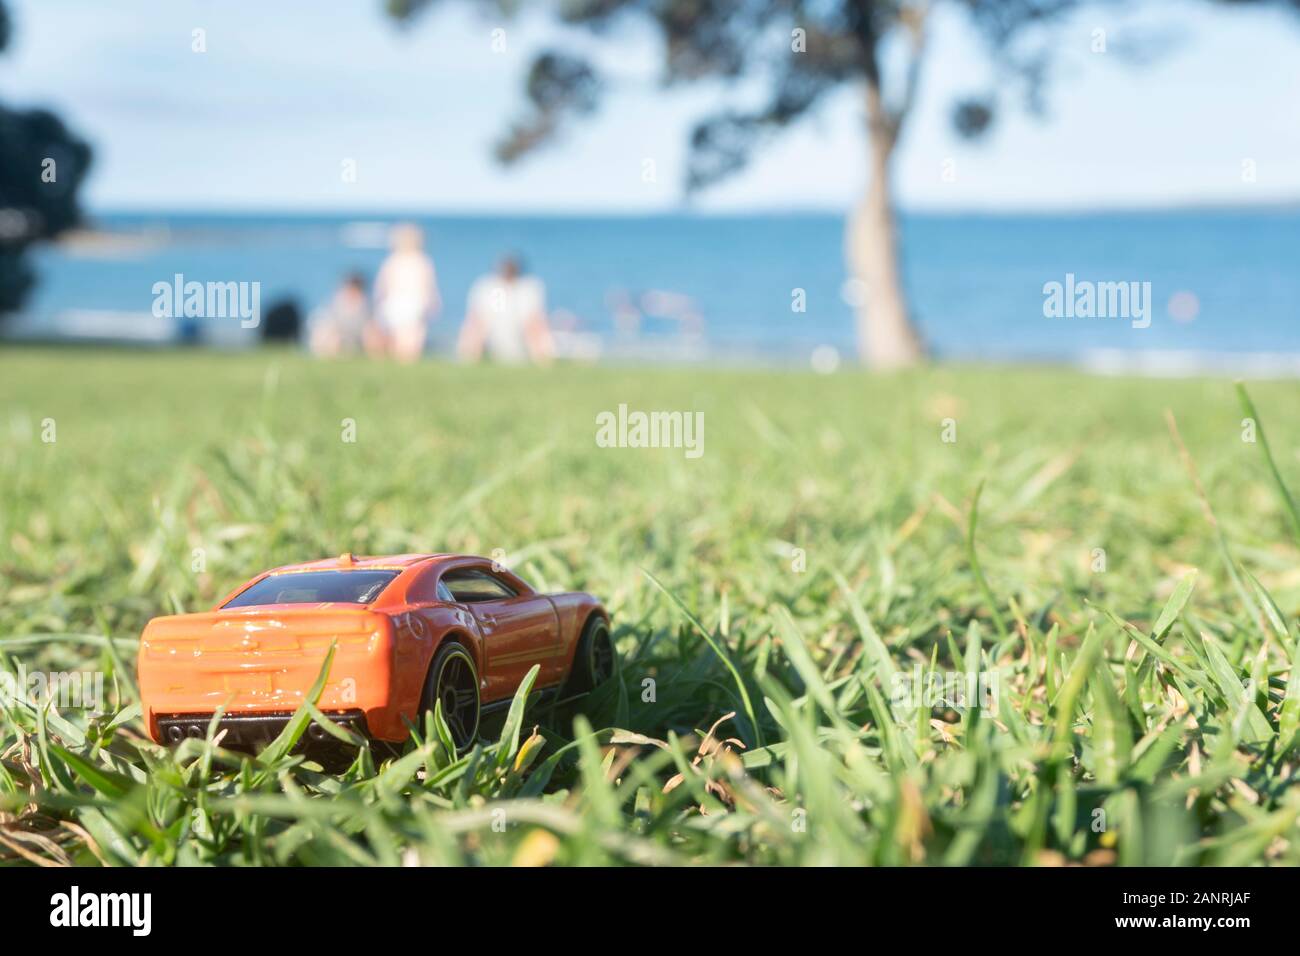 A toy car and family picnic at the beach - forced miniature perspective image Stock Photo